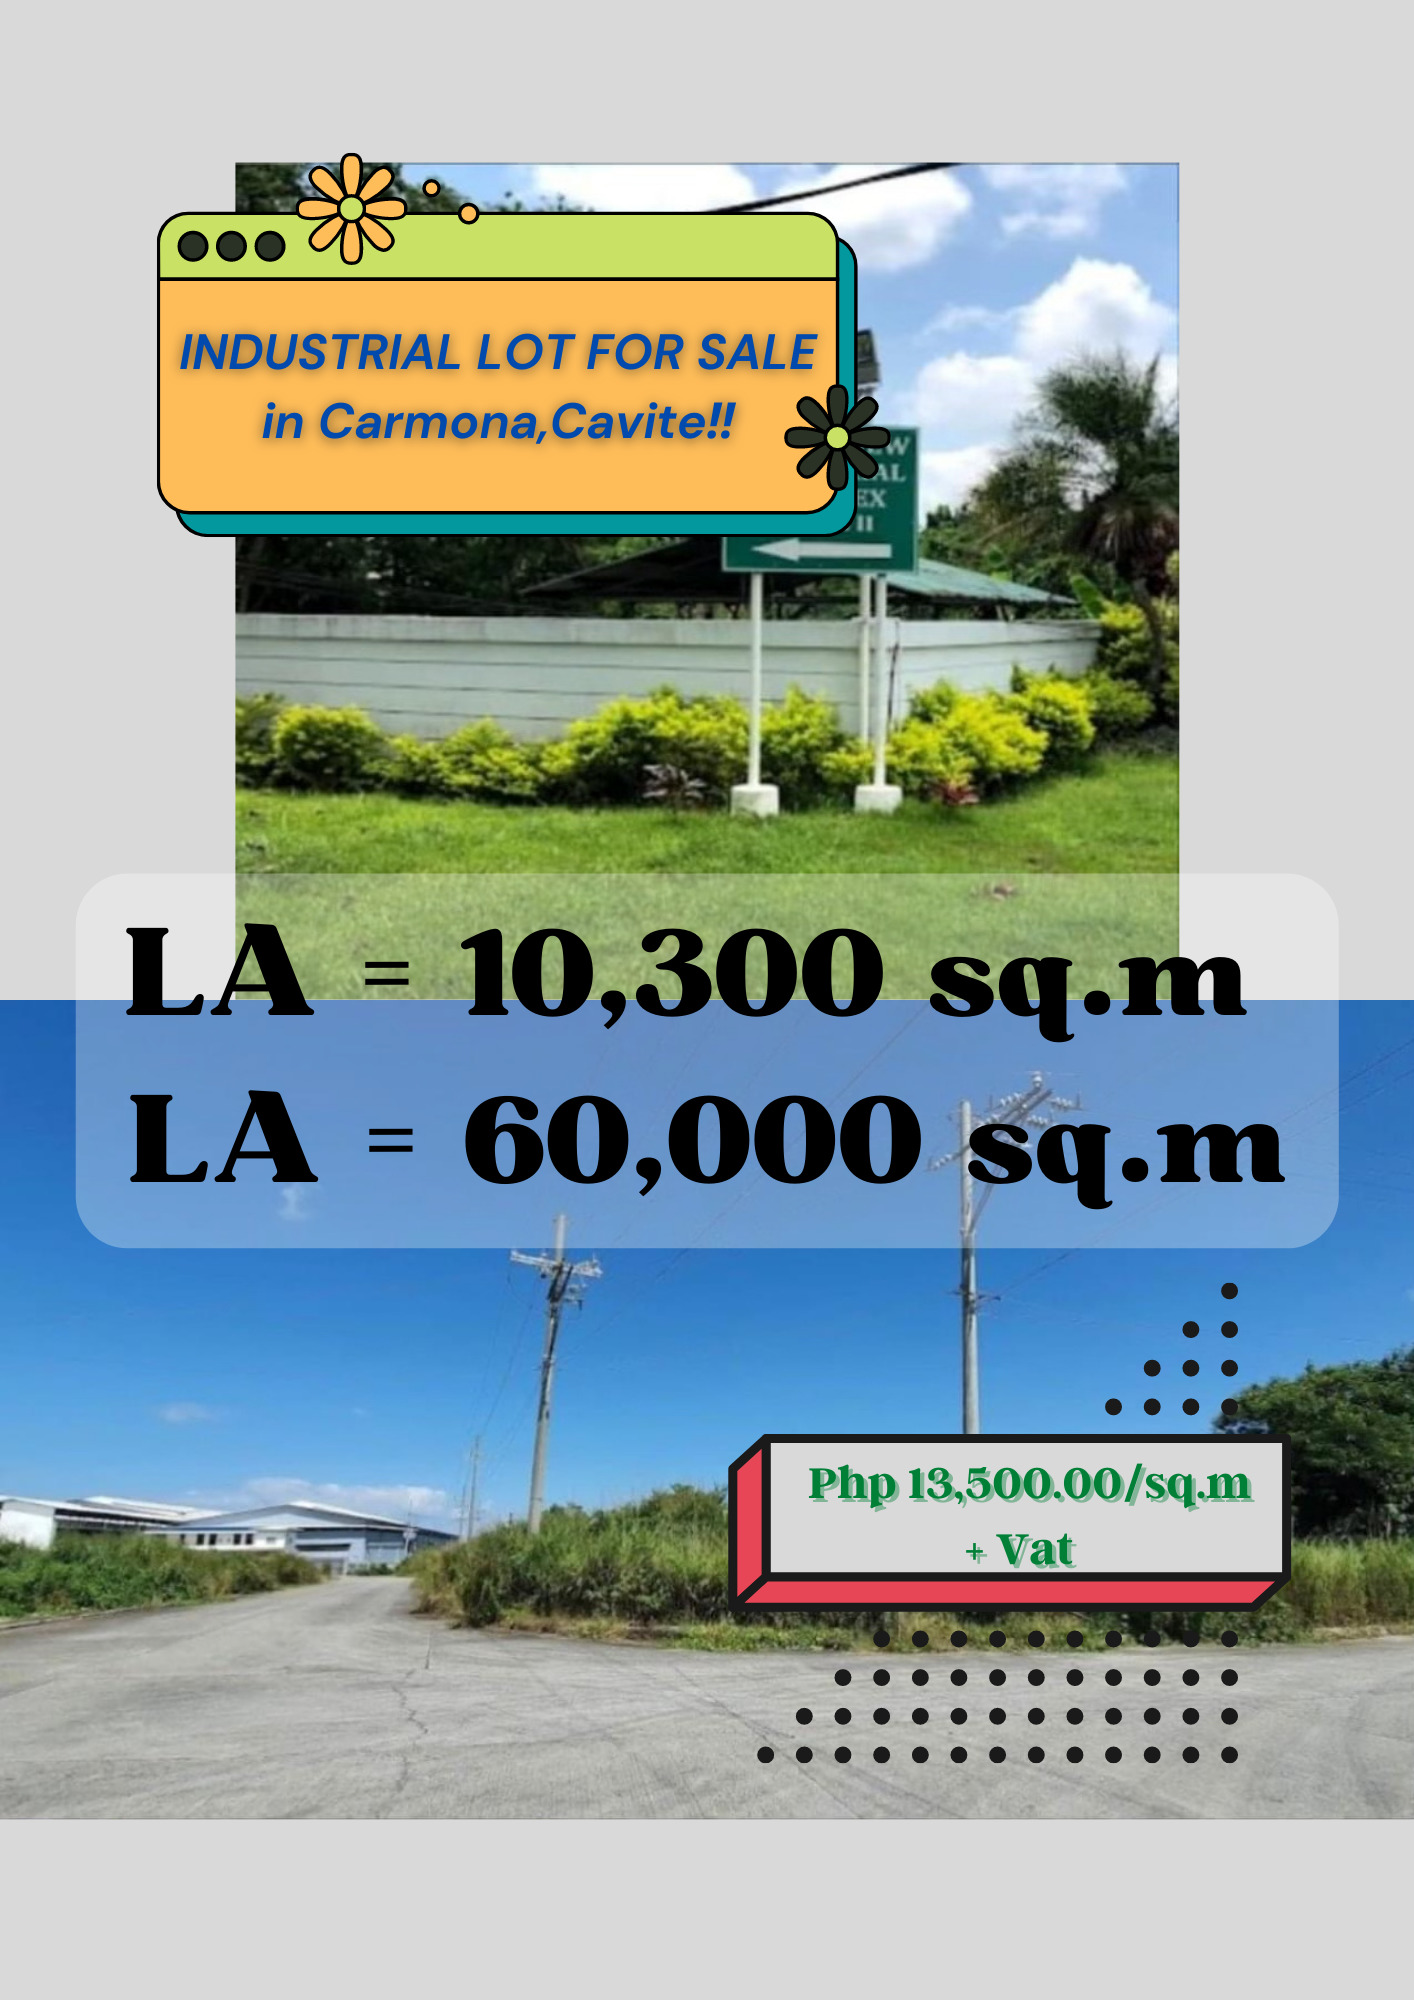 INDUSTRIAL LOT FOR SALE in Carmona, Cavite‼️